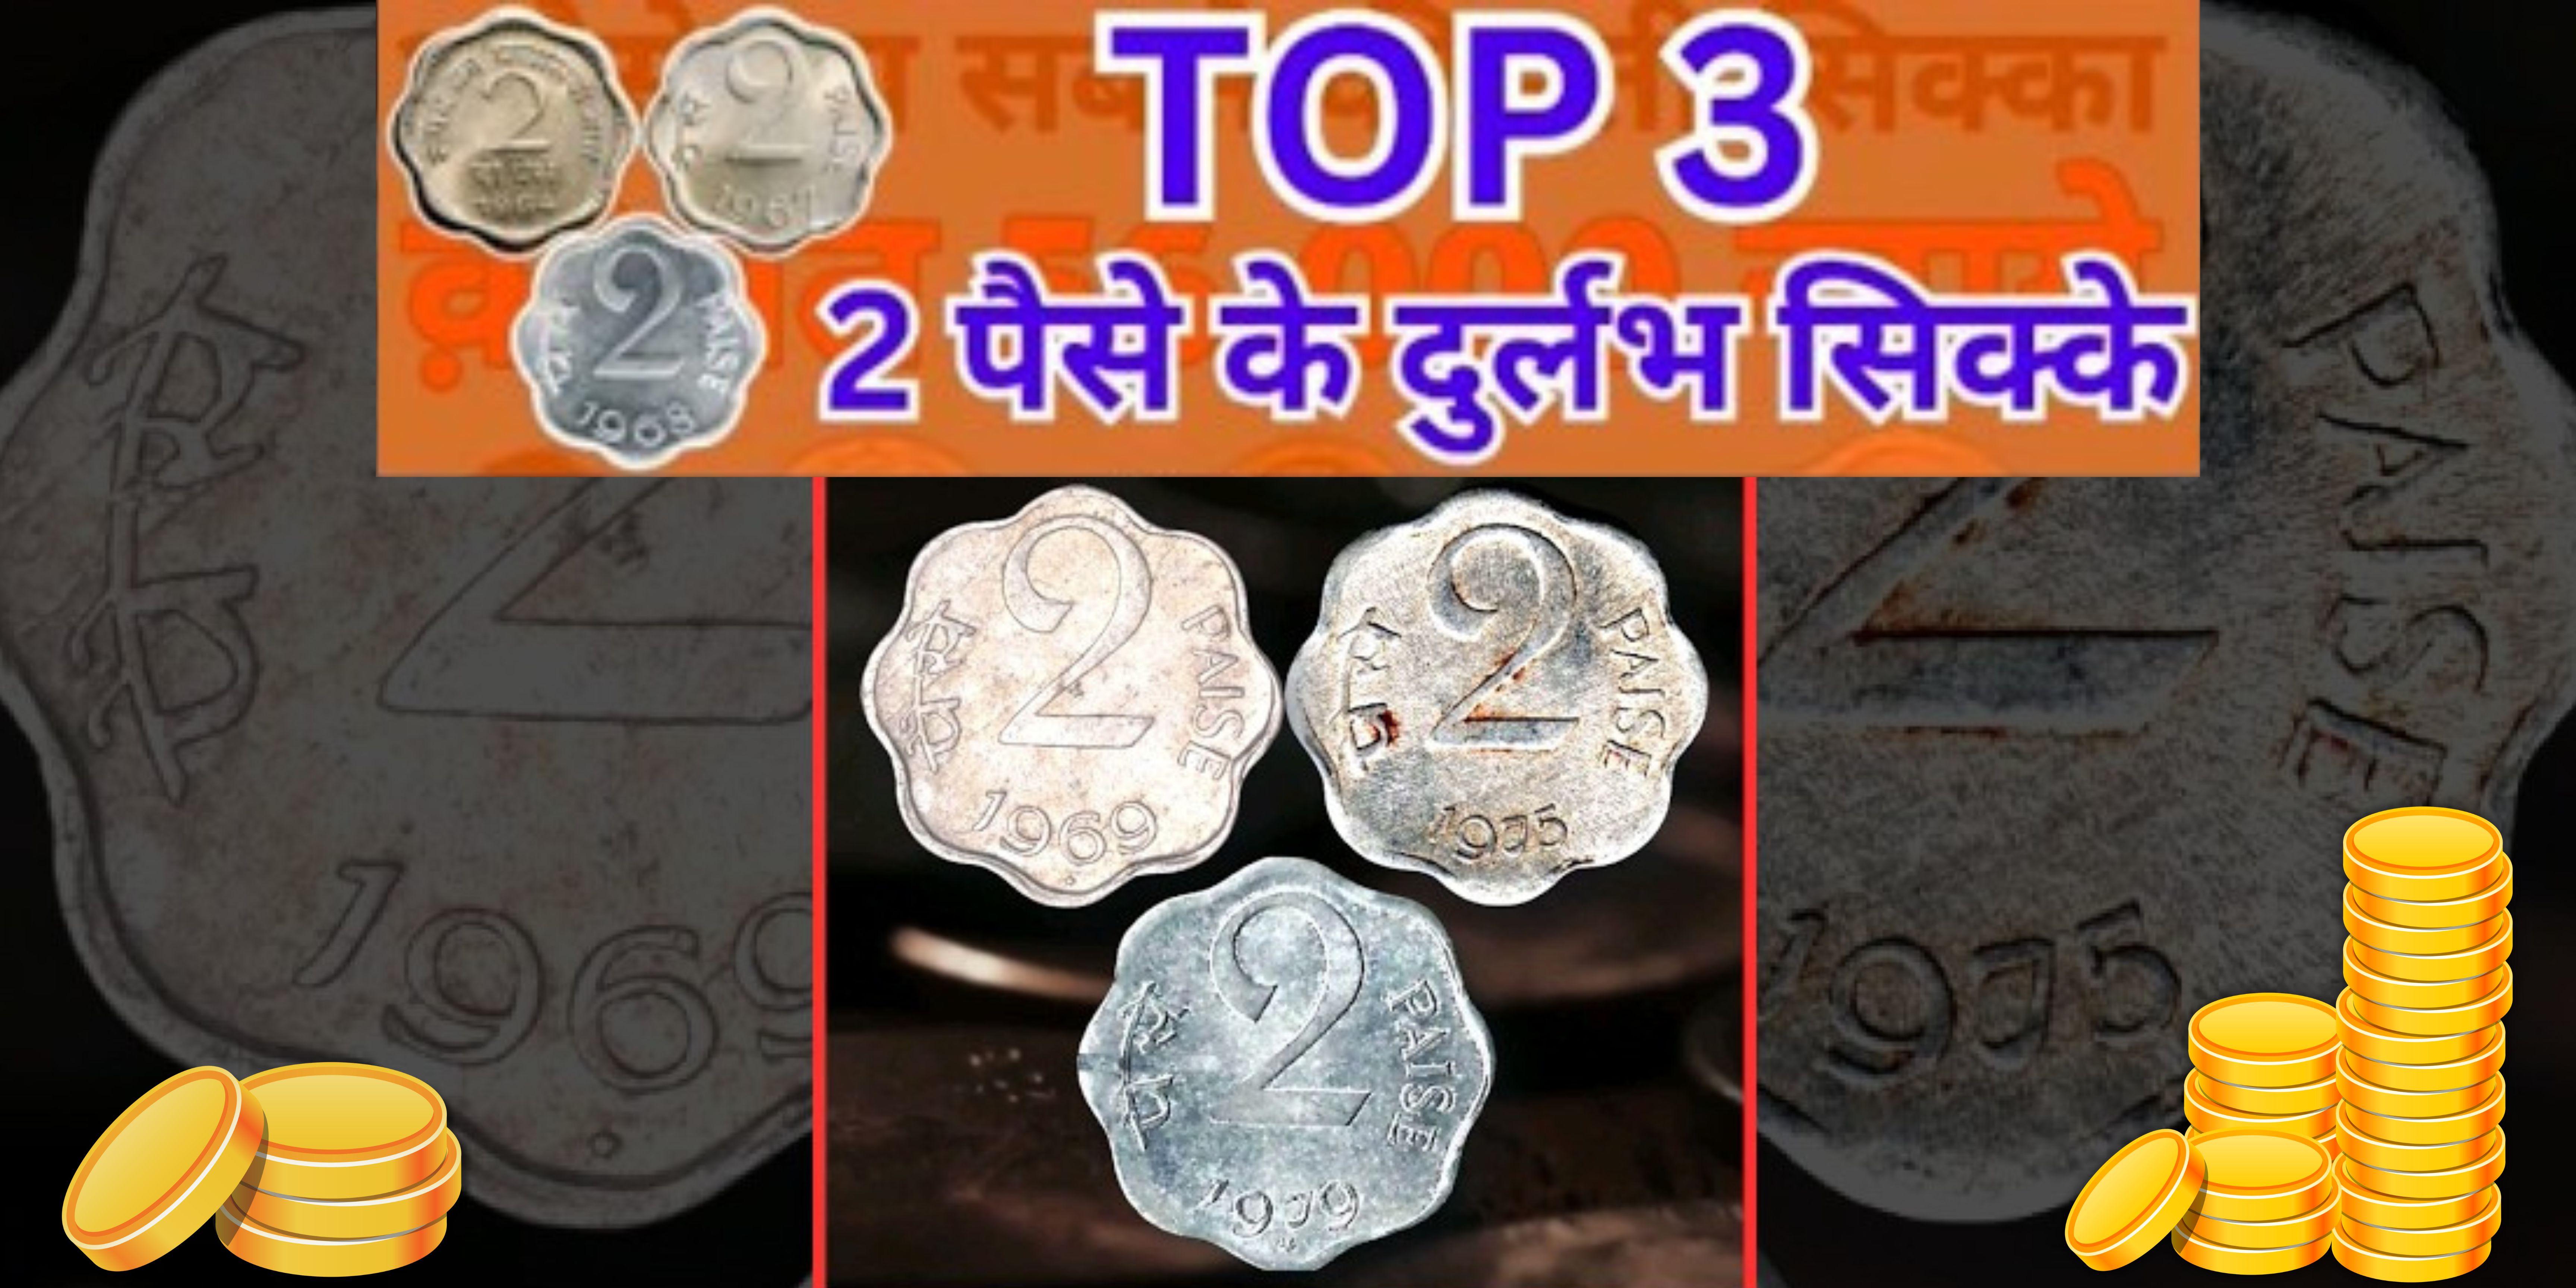 Top 3 Most Valuable 2 Paise Coins Value | Most Valuable Rare 2 Paise Coins Price Could Be 2000+ ? - Coinbazzar.com